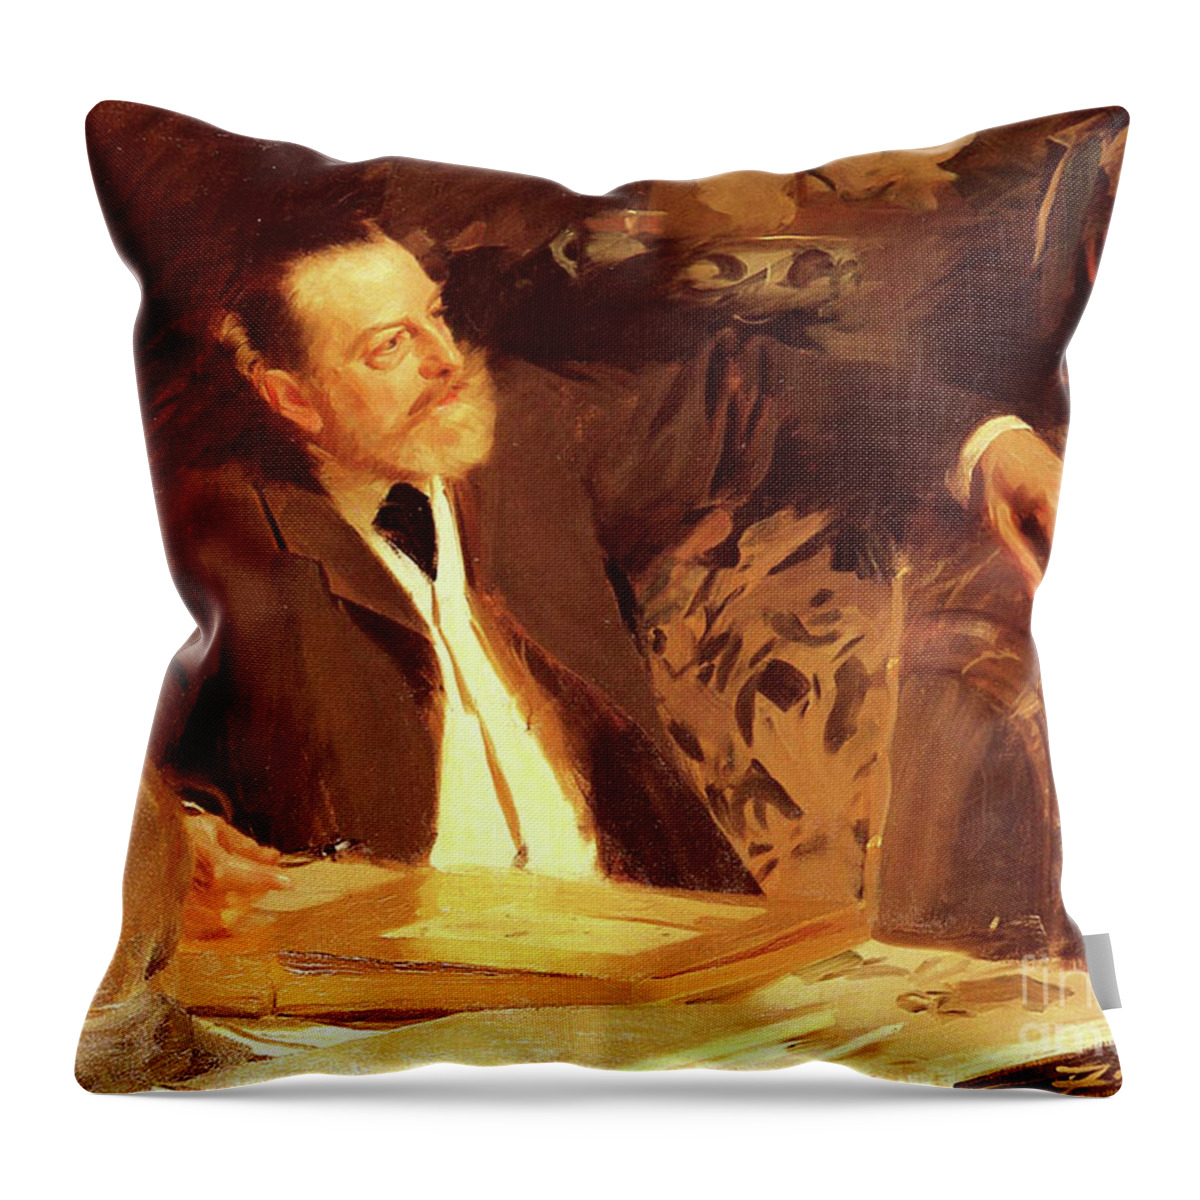 Zorn Throw Pillow featuring the painting Antonin Proust by Zorn